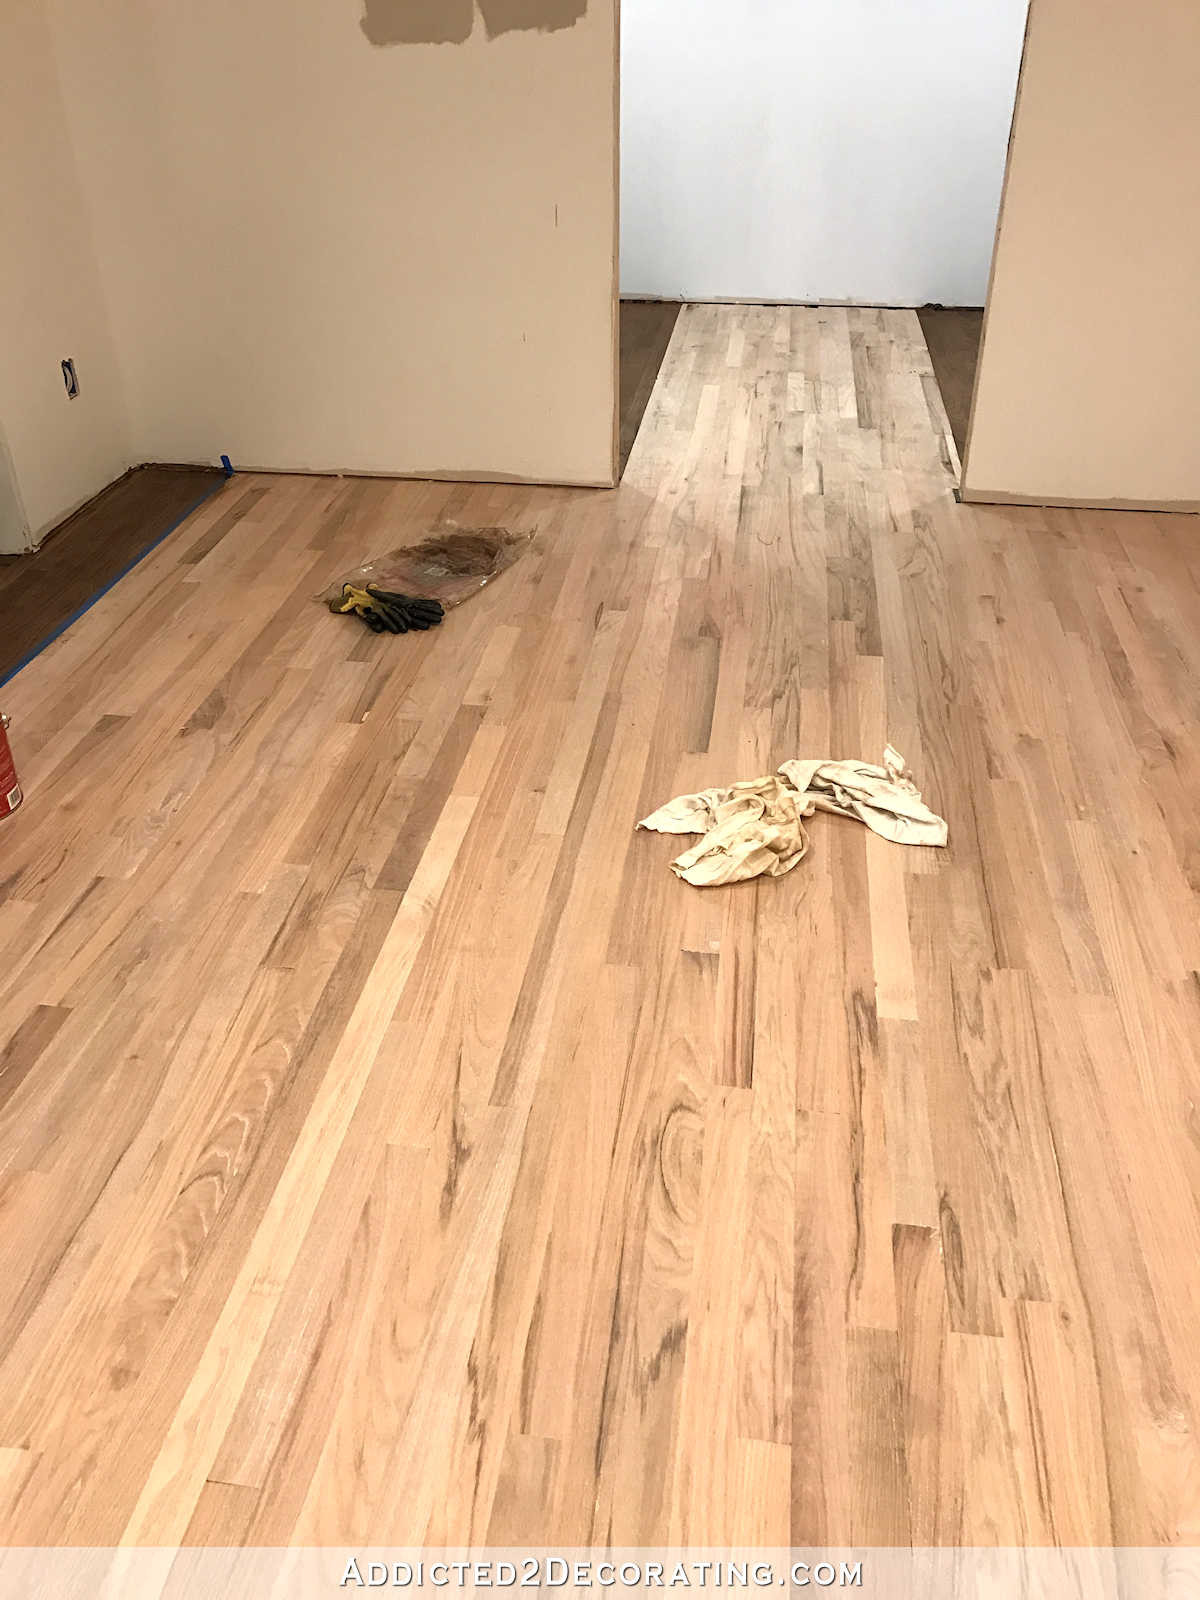 water based hardwood floor finish of adventures in staining my red oak hardwood floors products process with staining red oak hardwood floors 12 breakfast room and center of pantry left to